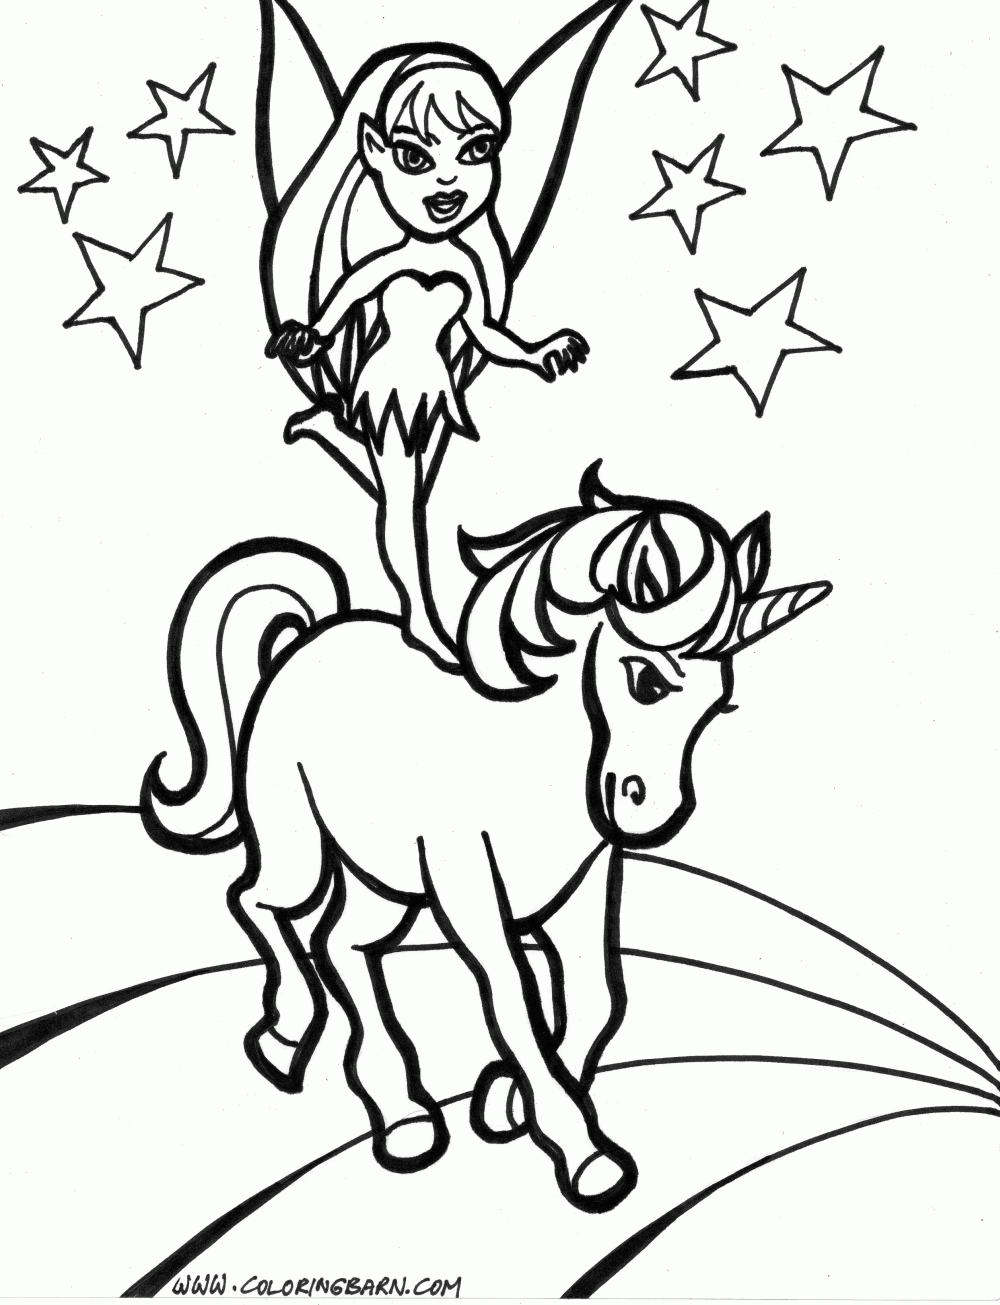 Unicorn Color Sheet - Coloring Pages for Kids and for Adults